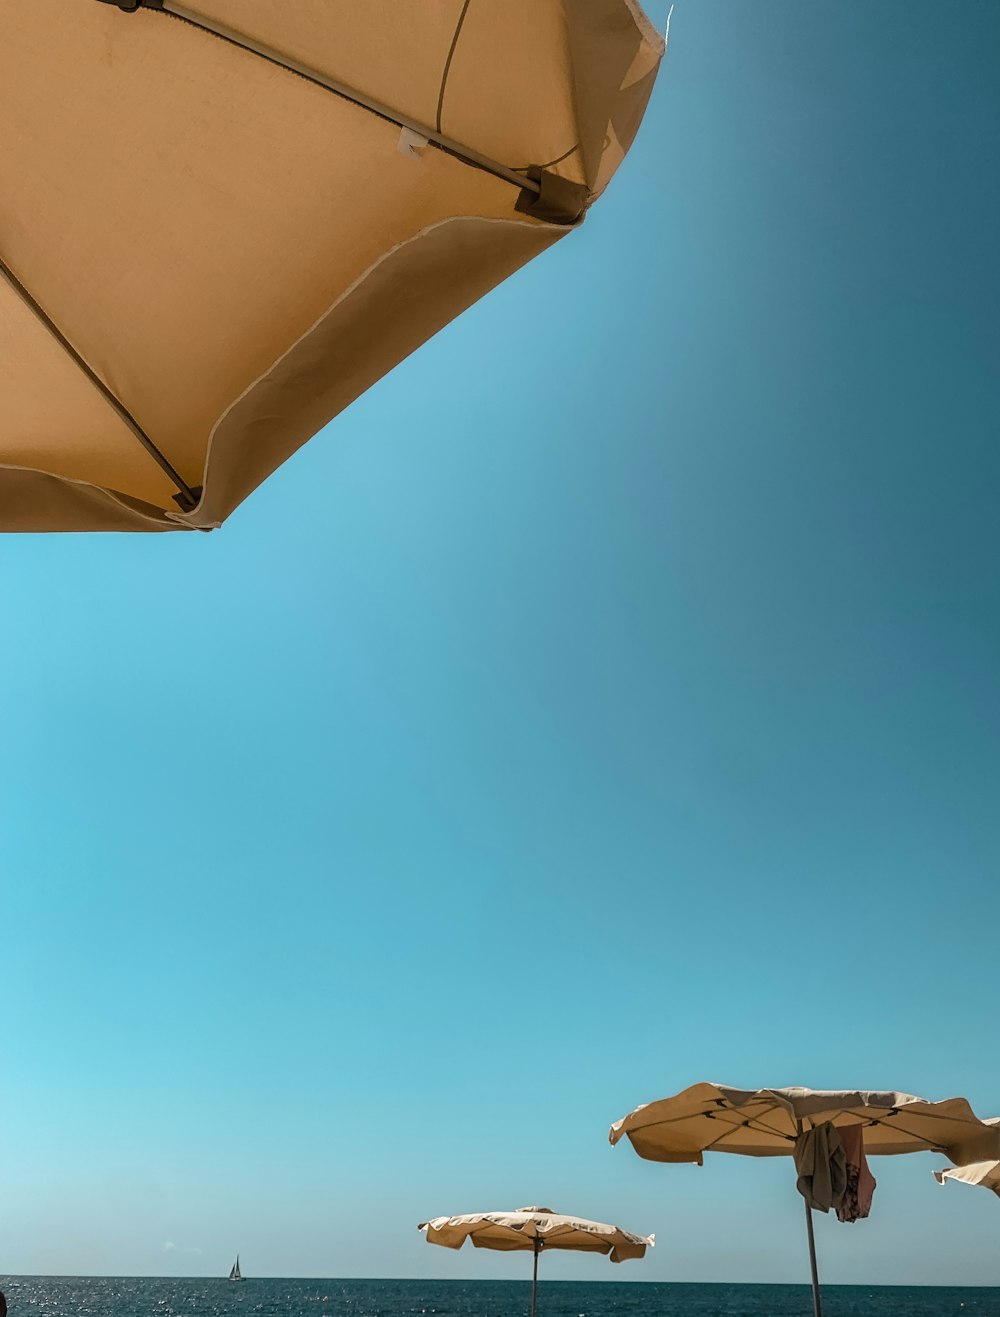 a beach with umbrellas and chairs on a sunny day